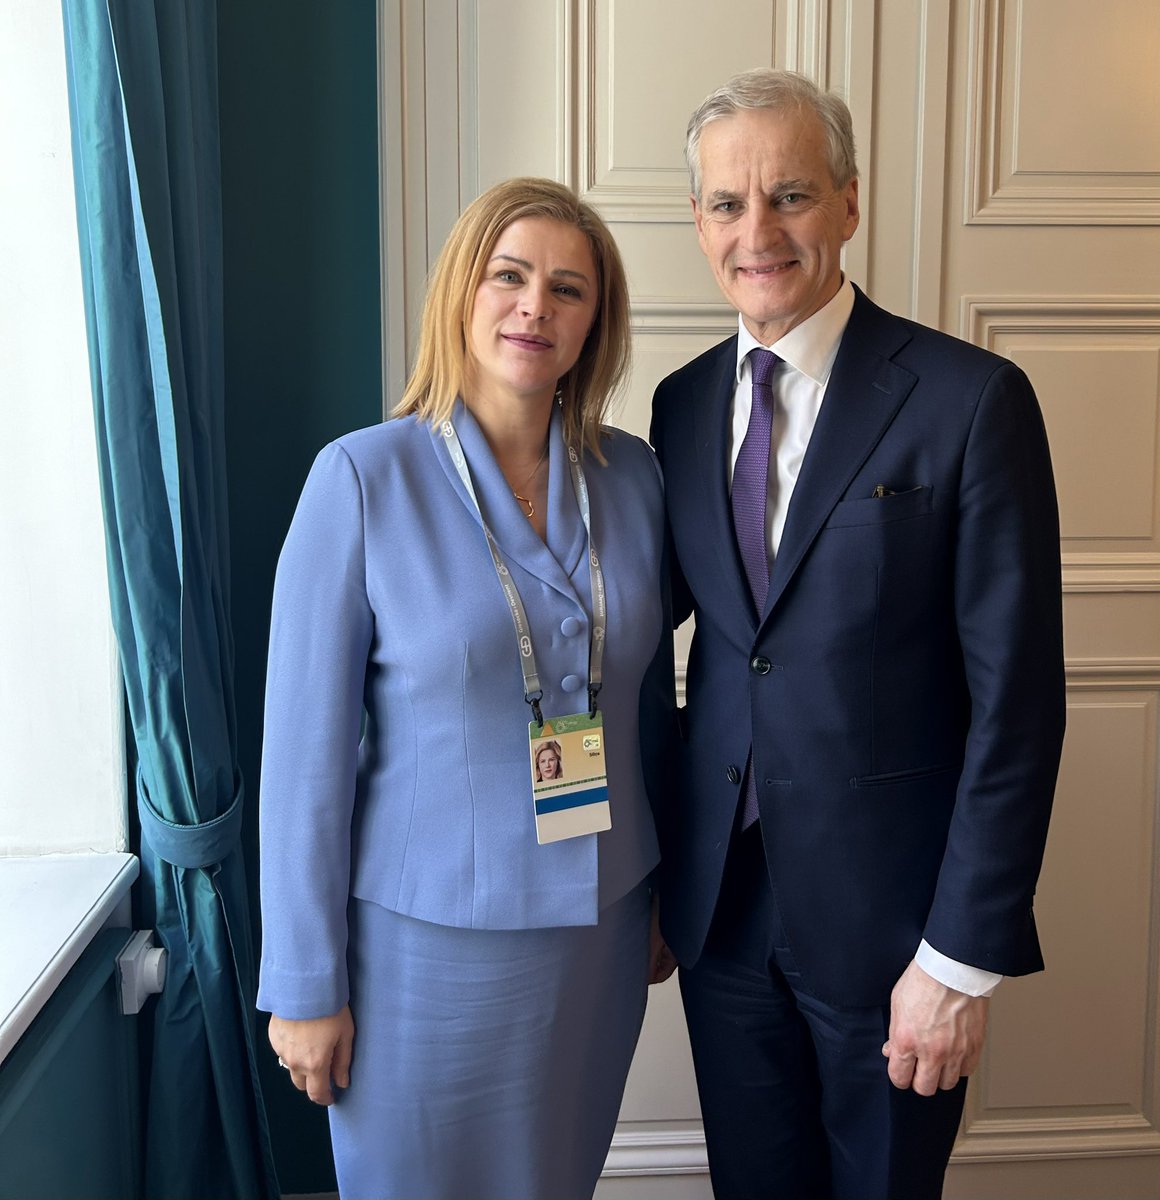 Great meeting with Latvian Prime Minister Silina today. As NATO allies that share a border with Russia, our bilateral relationship has never been stronger and more important. I look forward to strengthening 🇳🇴-🇱🇻 cooperation, including on the green transition. @EvikaSilina